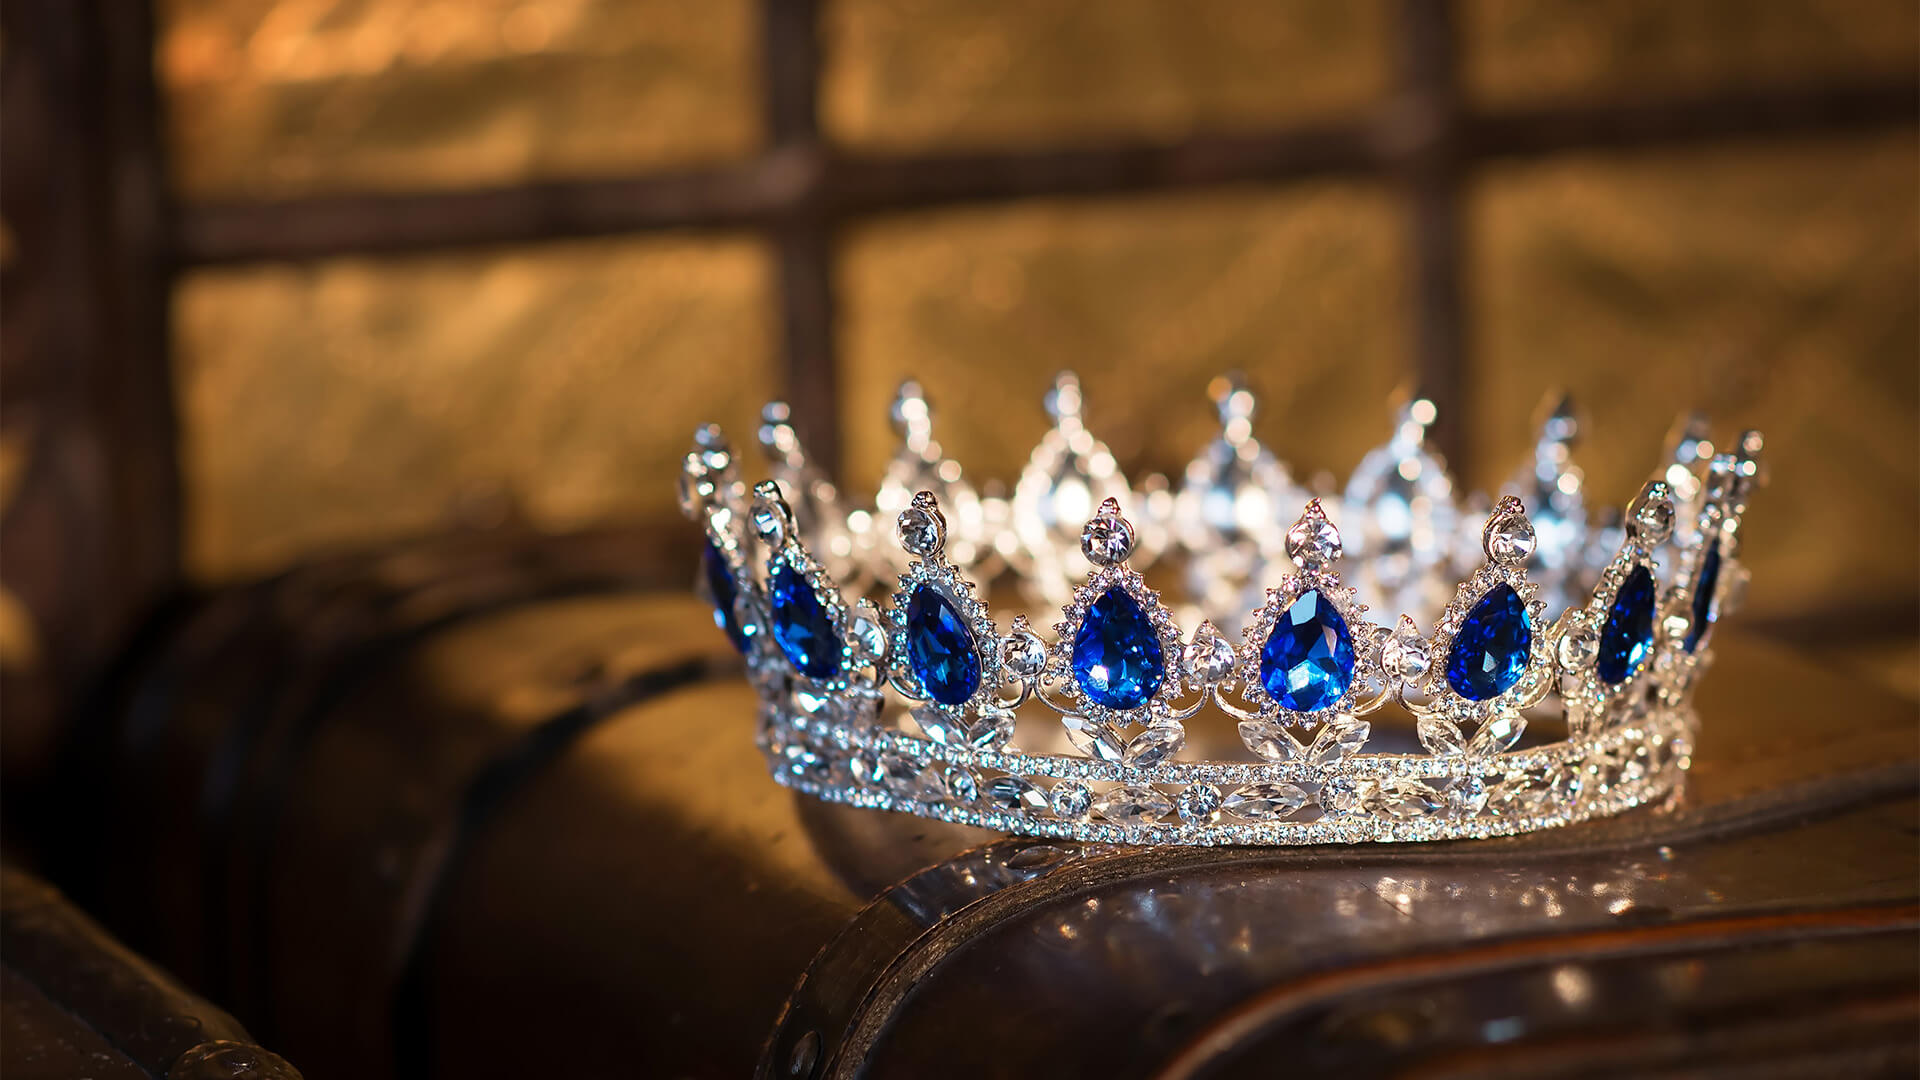 Sapphire and diamond crown resting on a brown leather surface